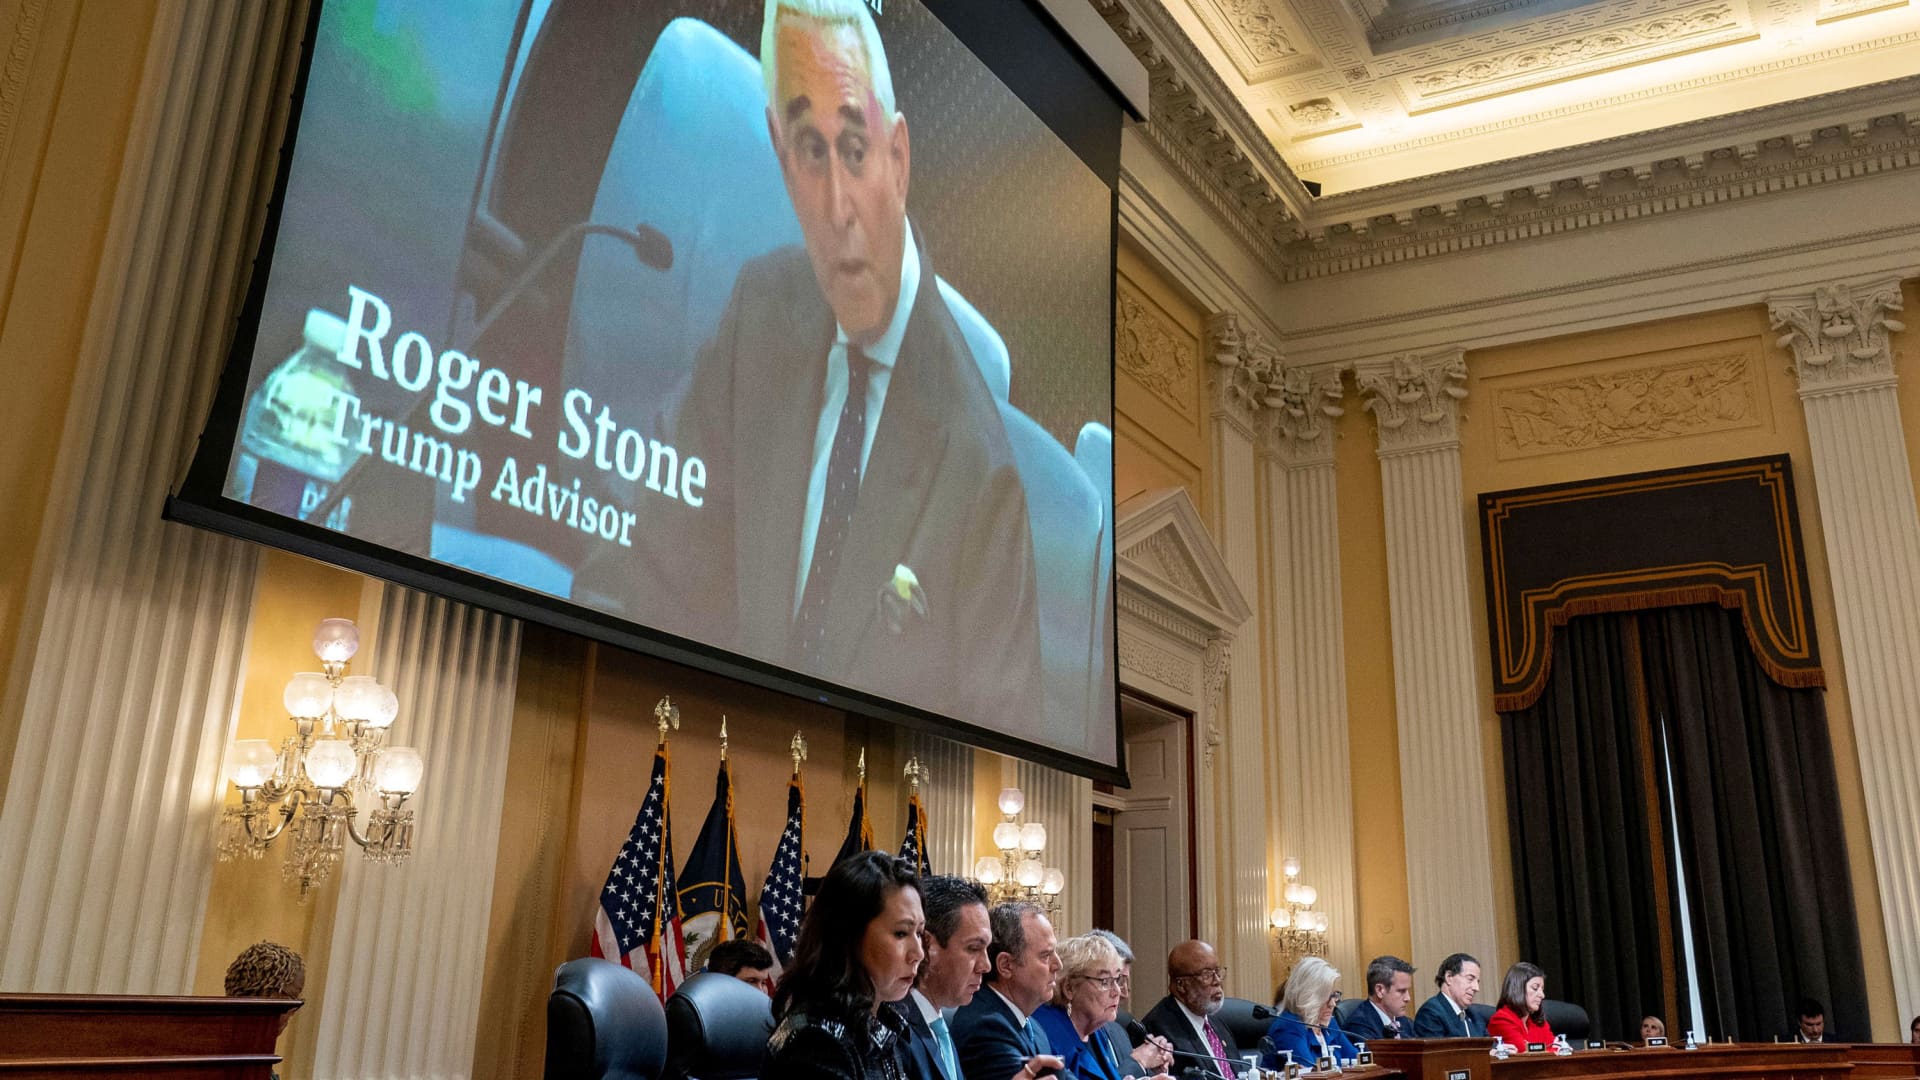 A video deposition with Roger Stone, a conservative political operative and consultant, is played during a hearing by U.S. House Select Committee to Investigate the January 6th Attack on the U.S. Capitol, on Capitol Hill in Washington, October 13, 2022.